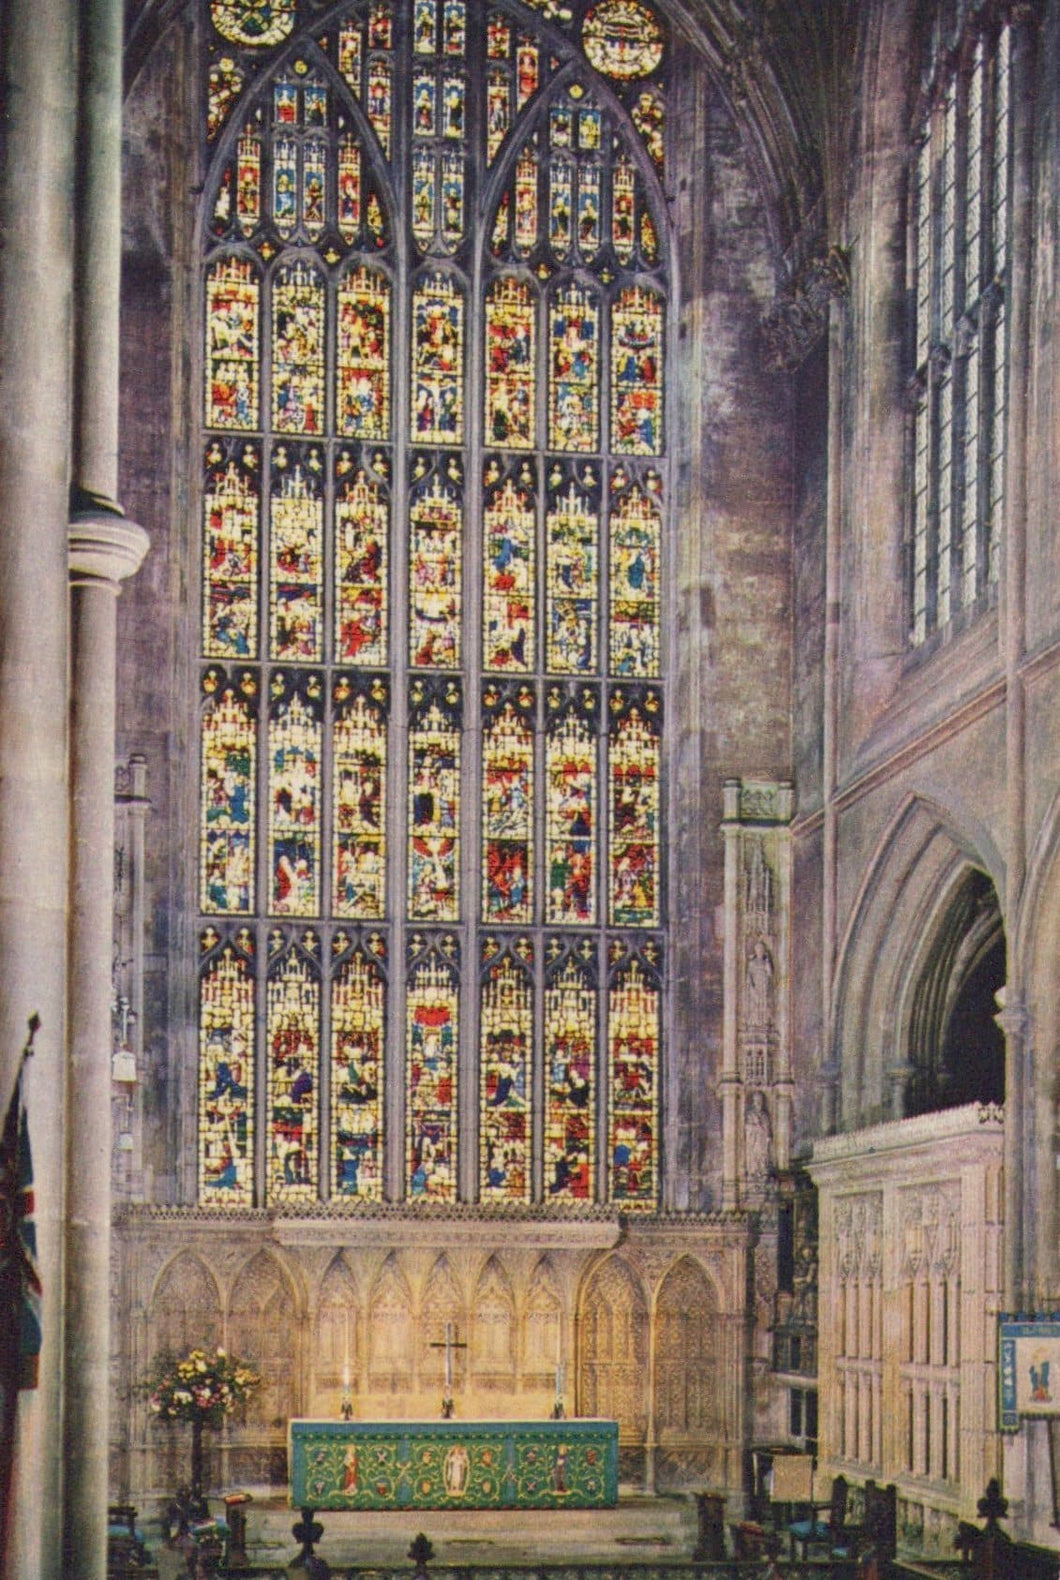 Somerset Postcard - Bath Abbey - The Altar and Great East Window - Mo’s Postcards 